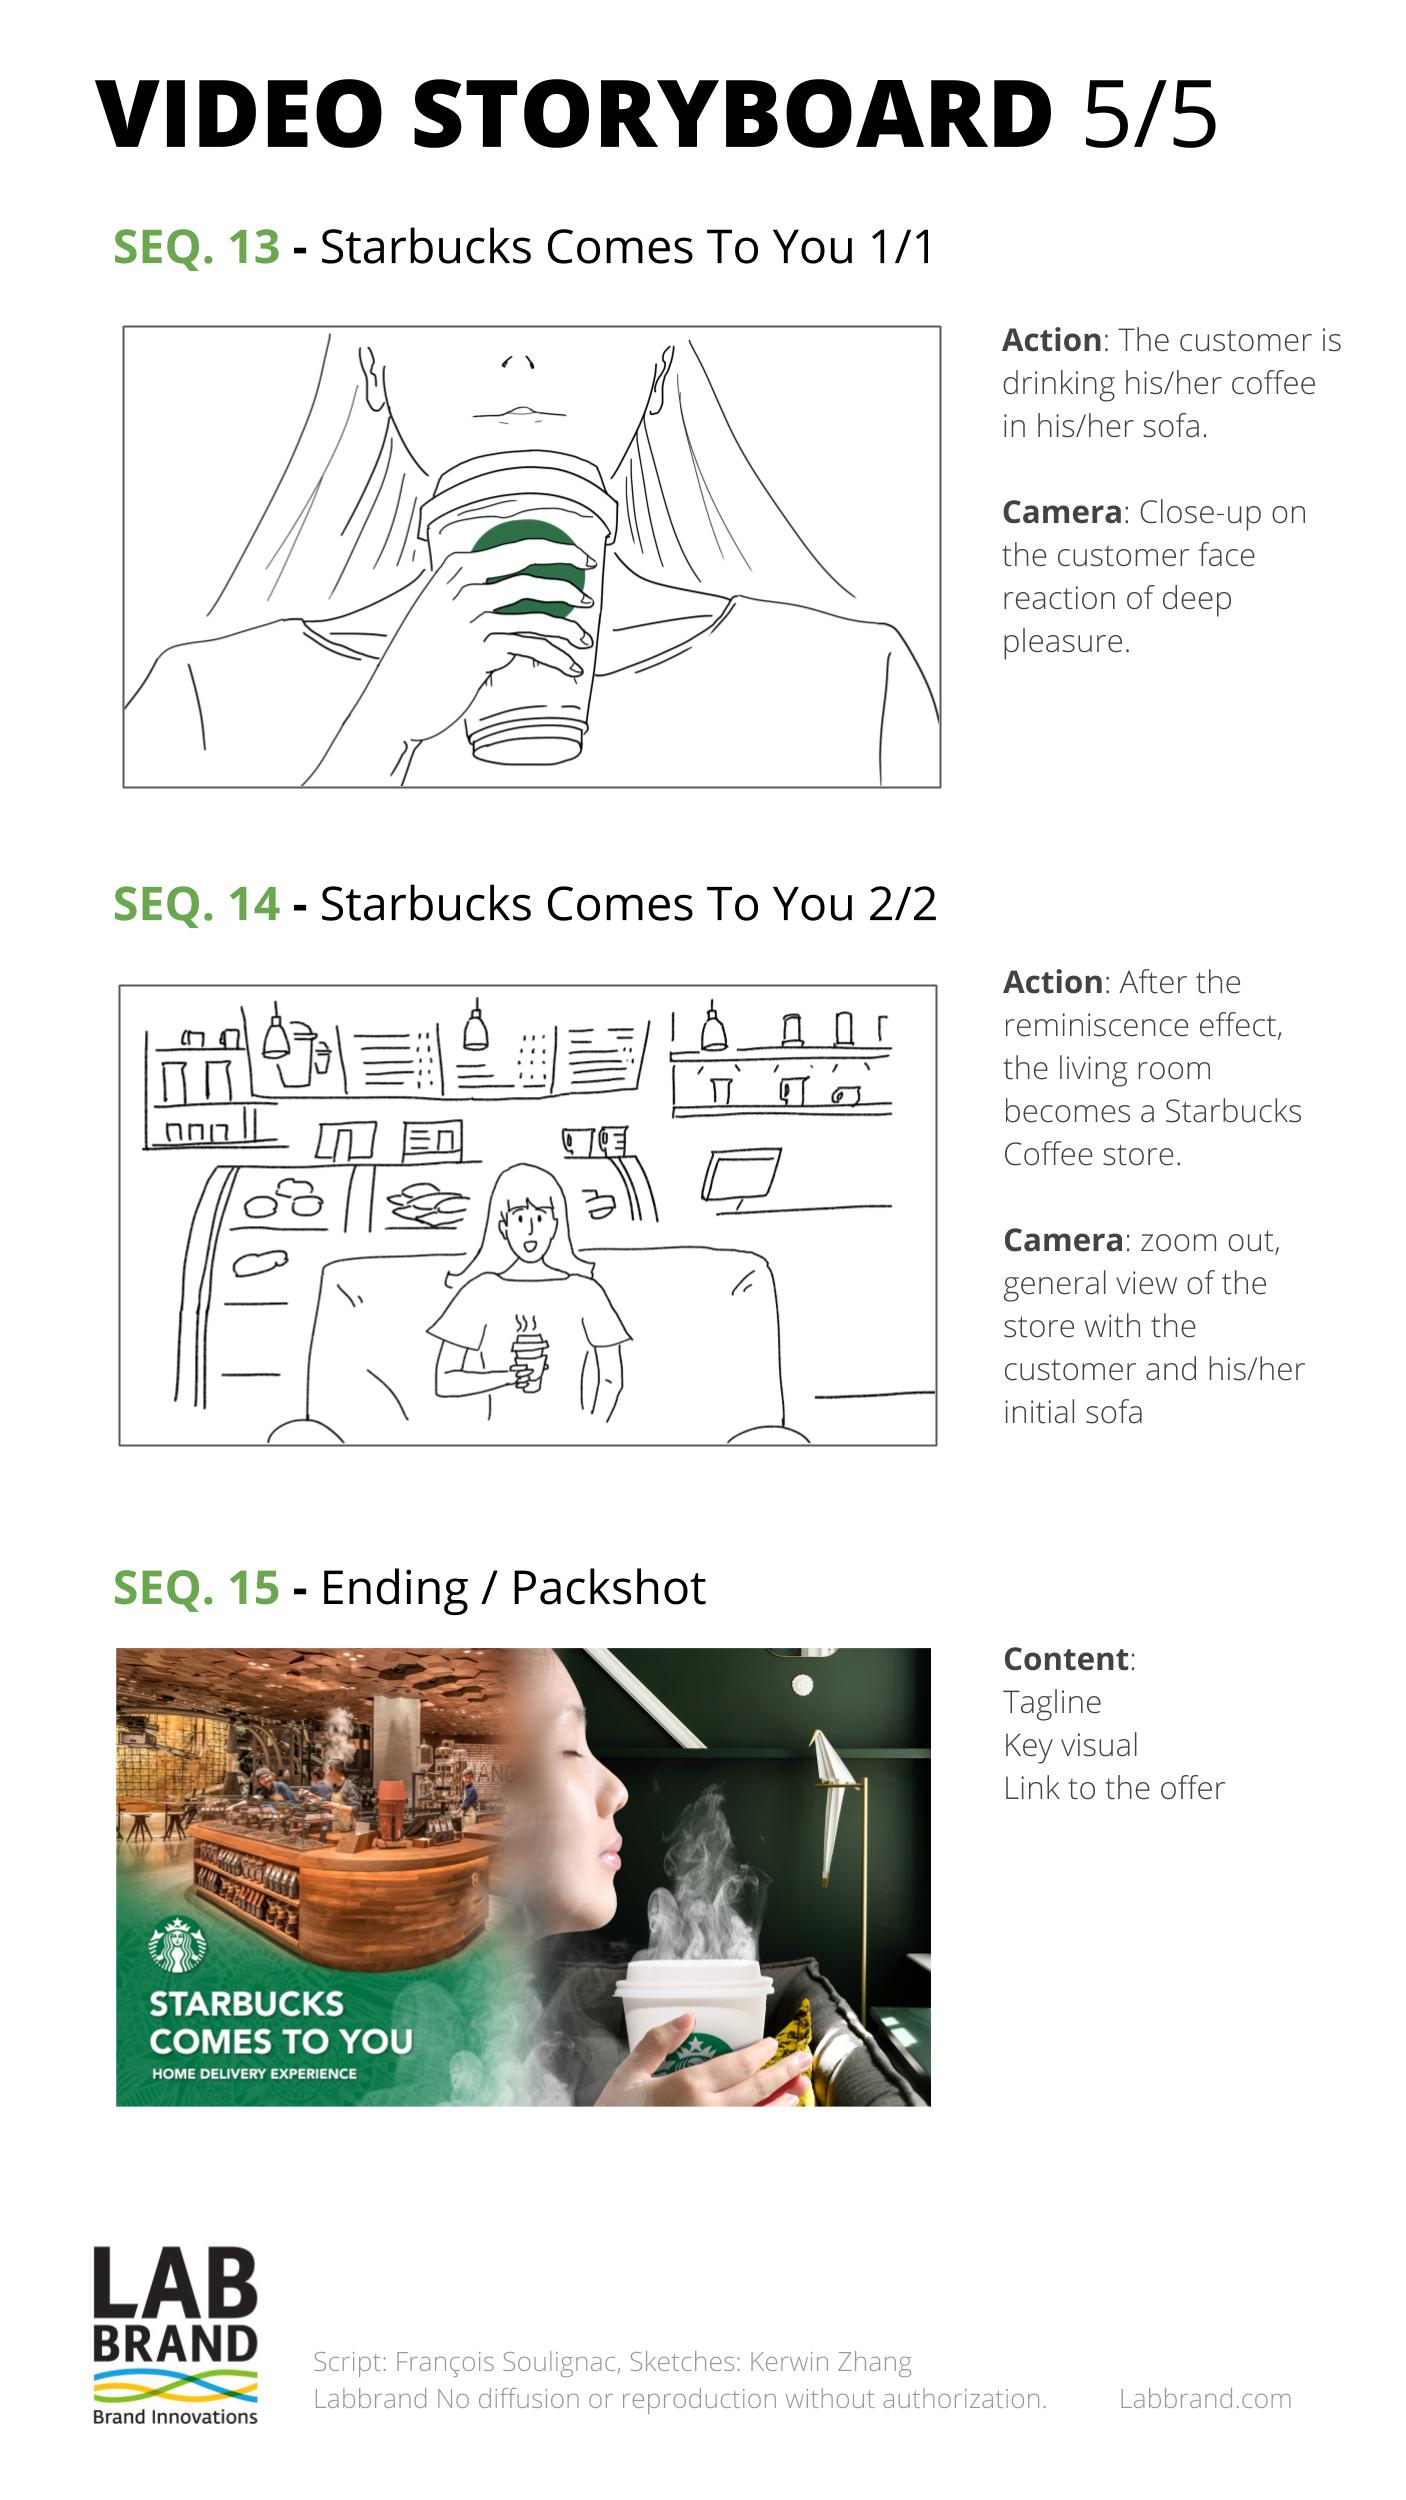 Starbucks China - Delivery Campaign - STORYBOARD SEQUENCES - Francois Soulignac - MADJOR Labbrand, Shanghai